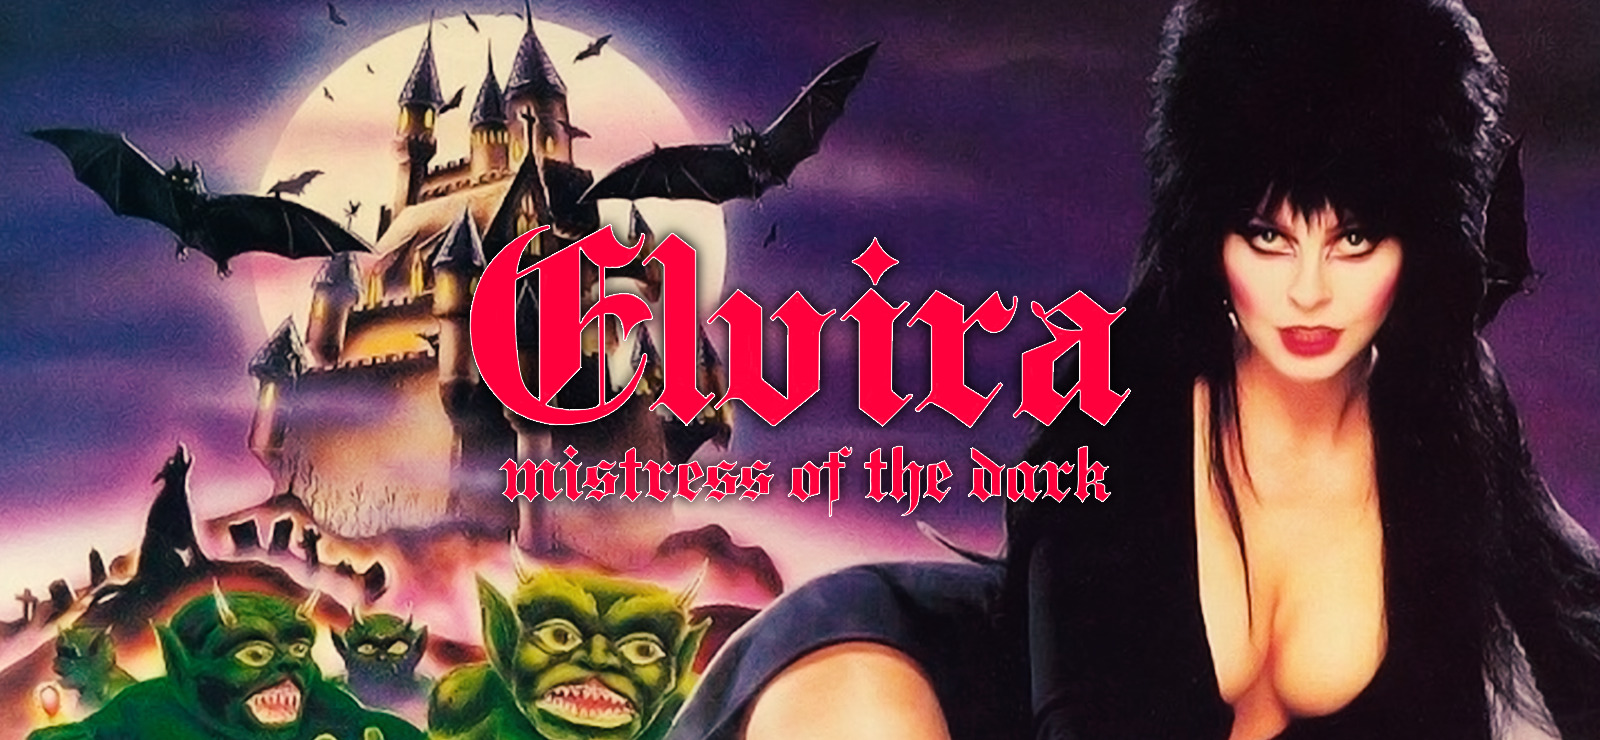 chase fricke recommends Pictures Of Elvira Mistress Of The Dark